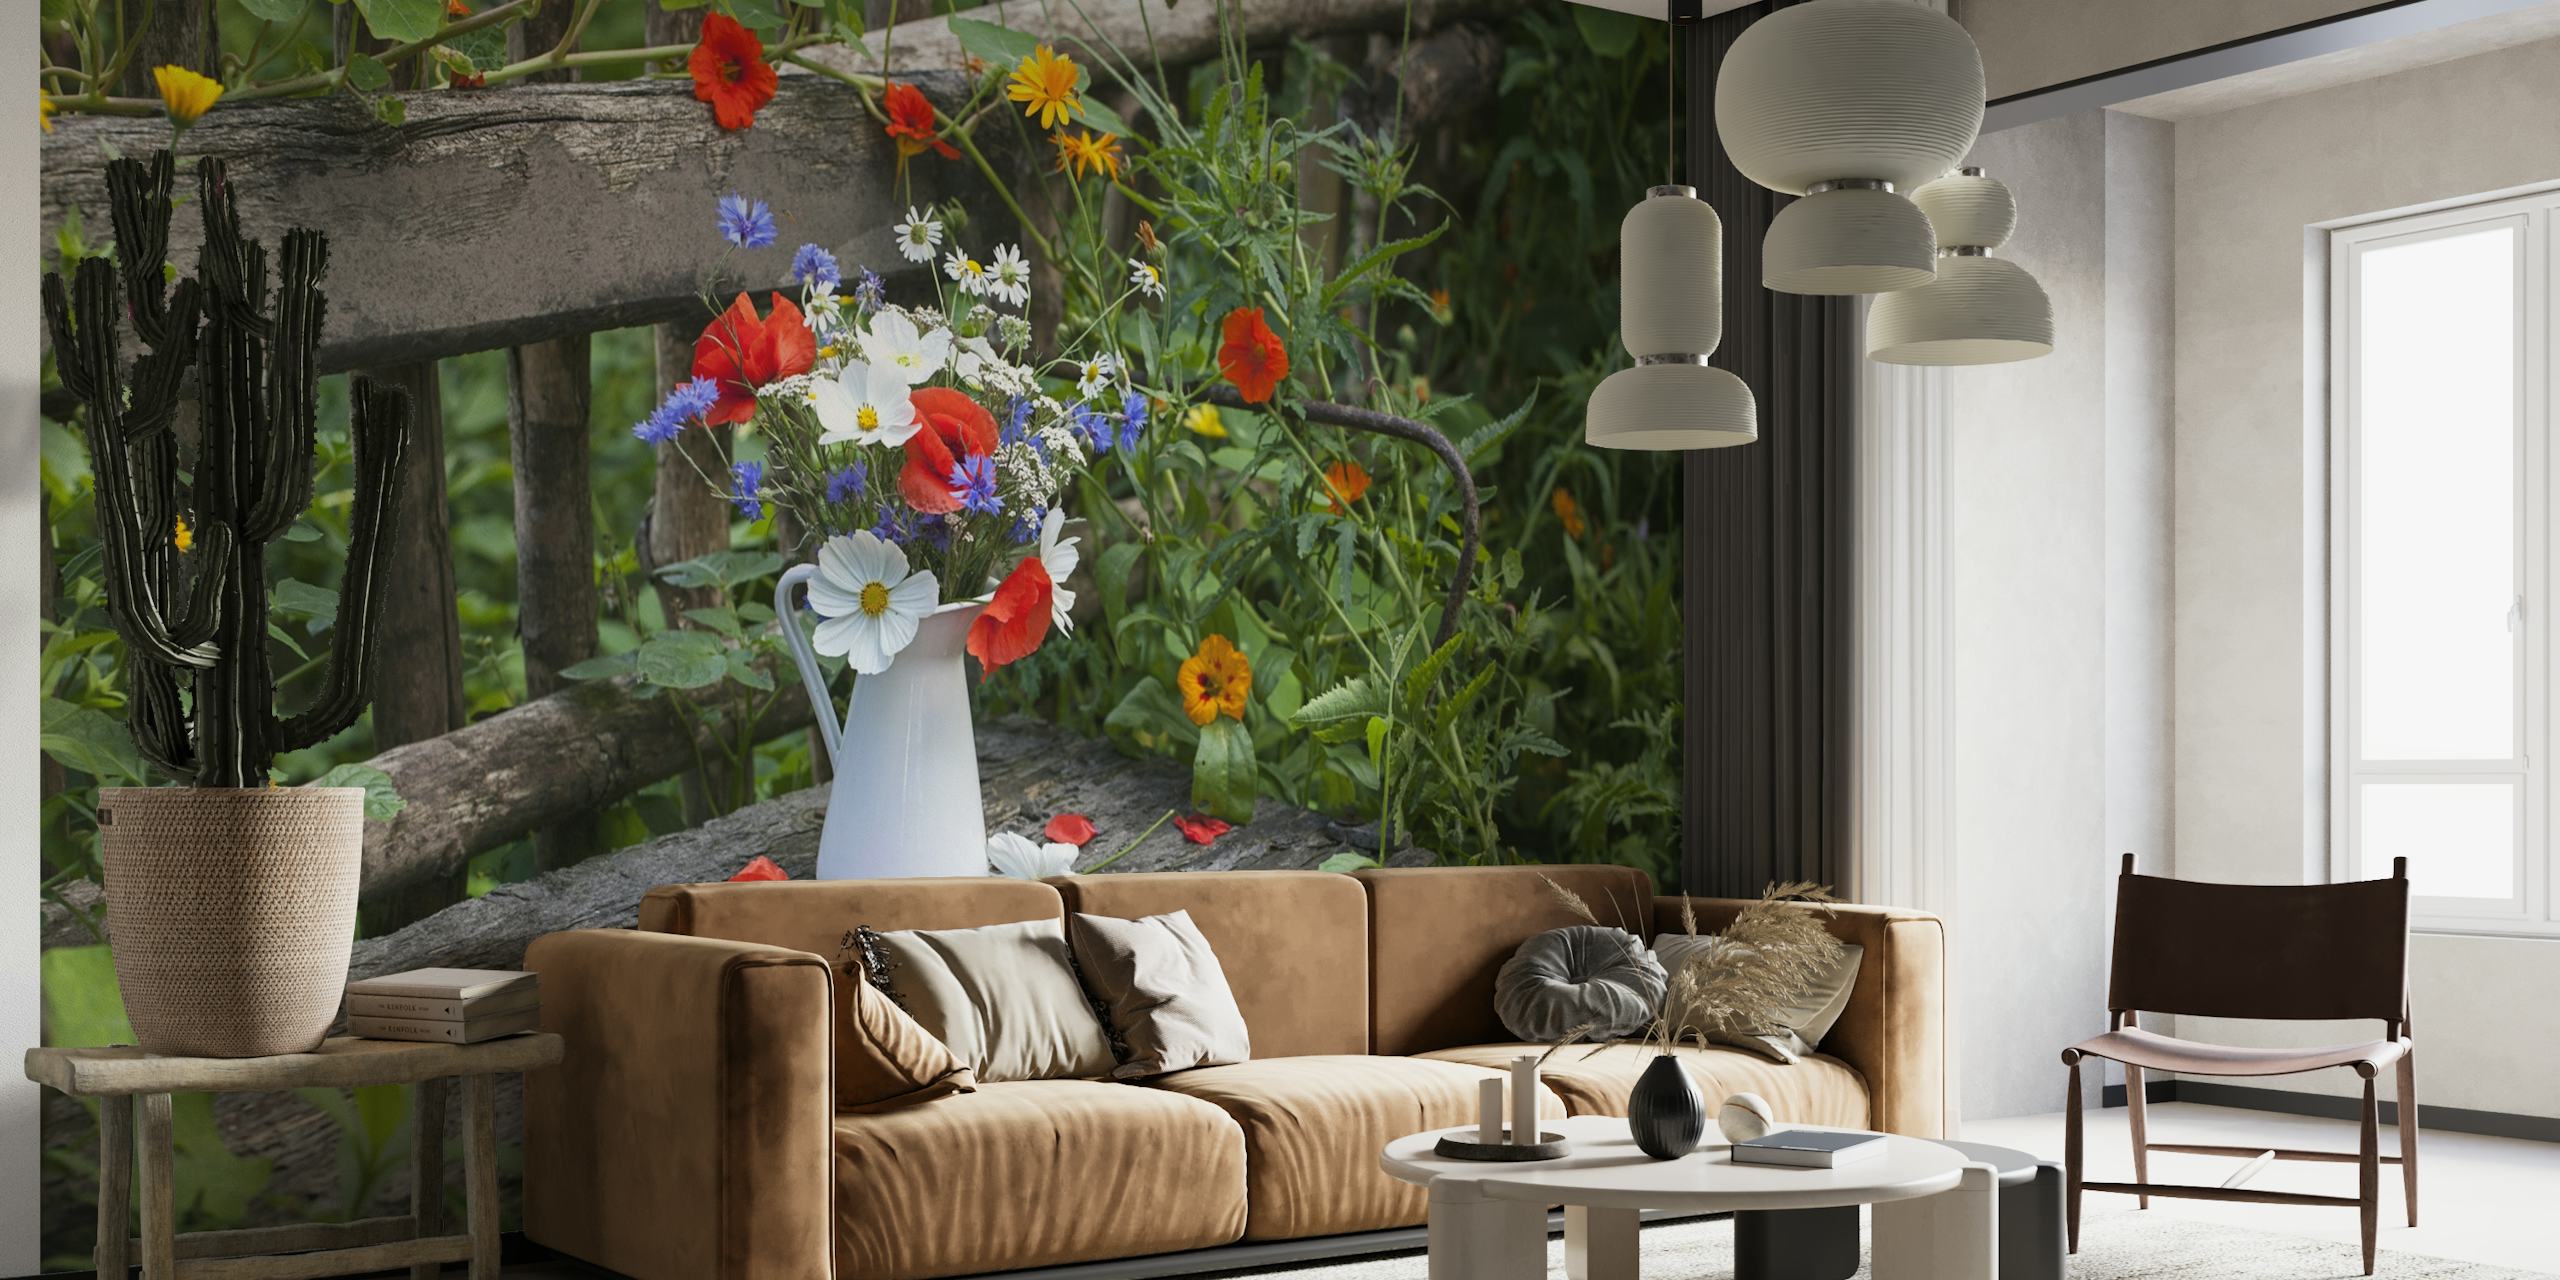 Wall mural of a wild flower bouquet in a white pitcher on a wooden bench